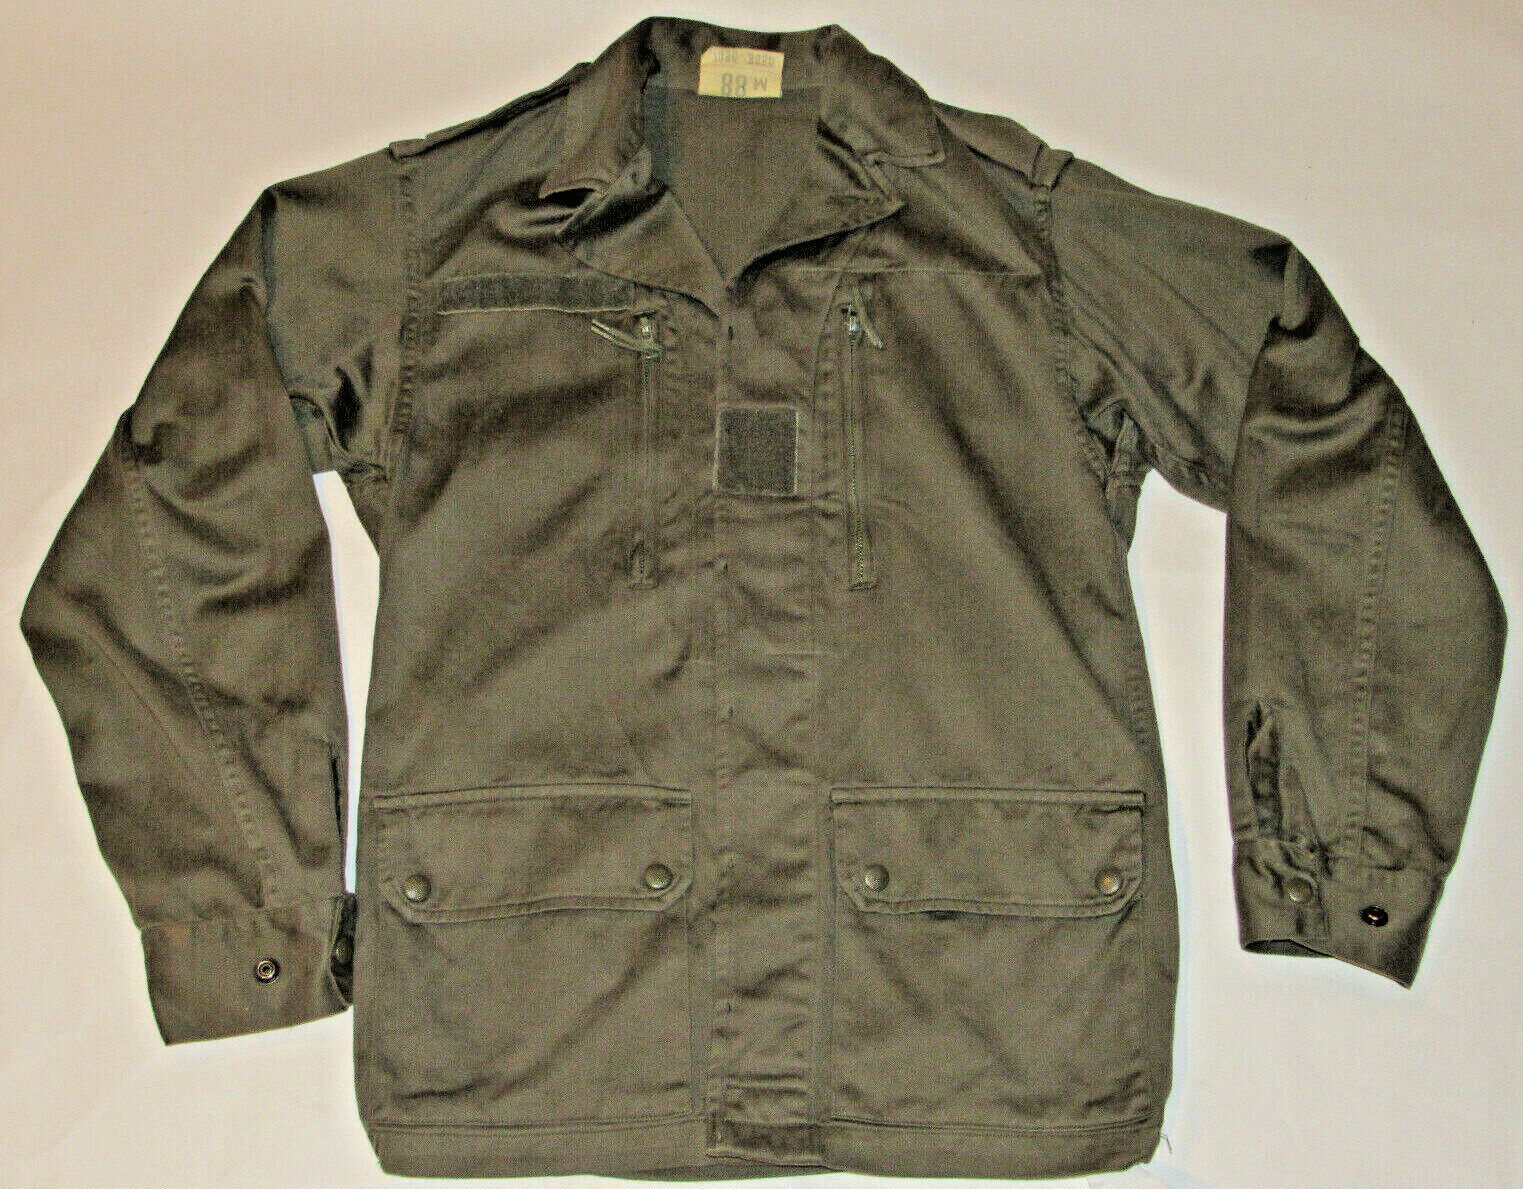 VINTAGE FRENCH LIGHTWEIGHT MILITARY JACKET 4 POCKETS BUTTON FRONT EPAULETS S